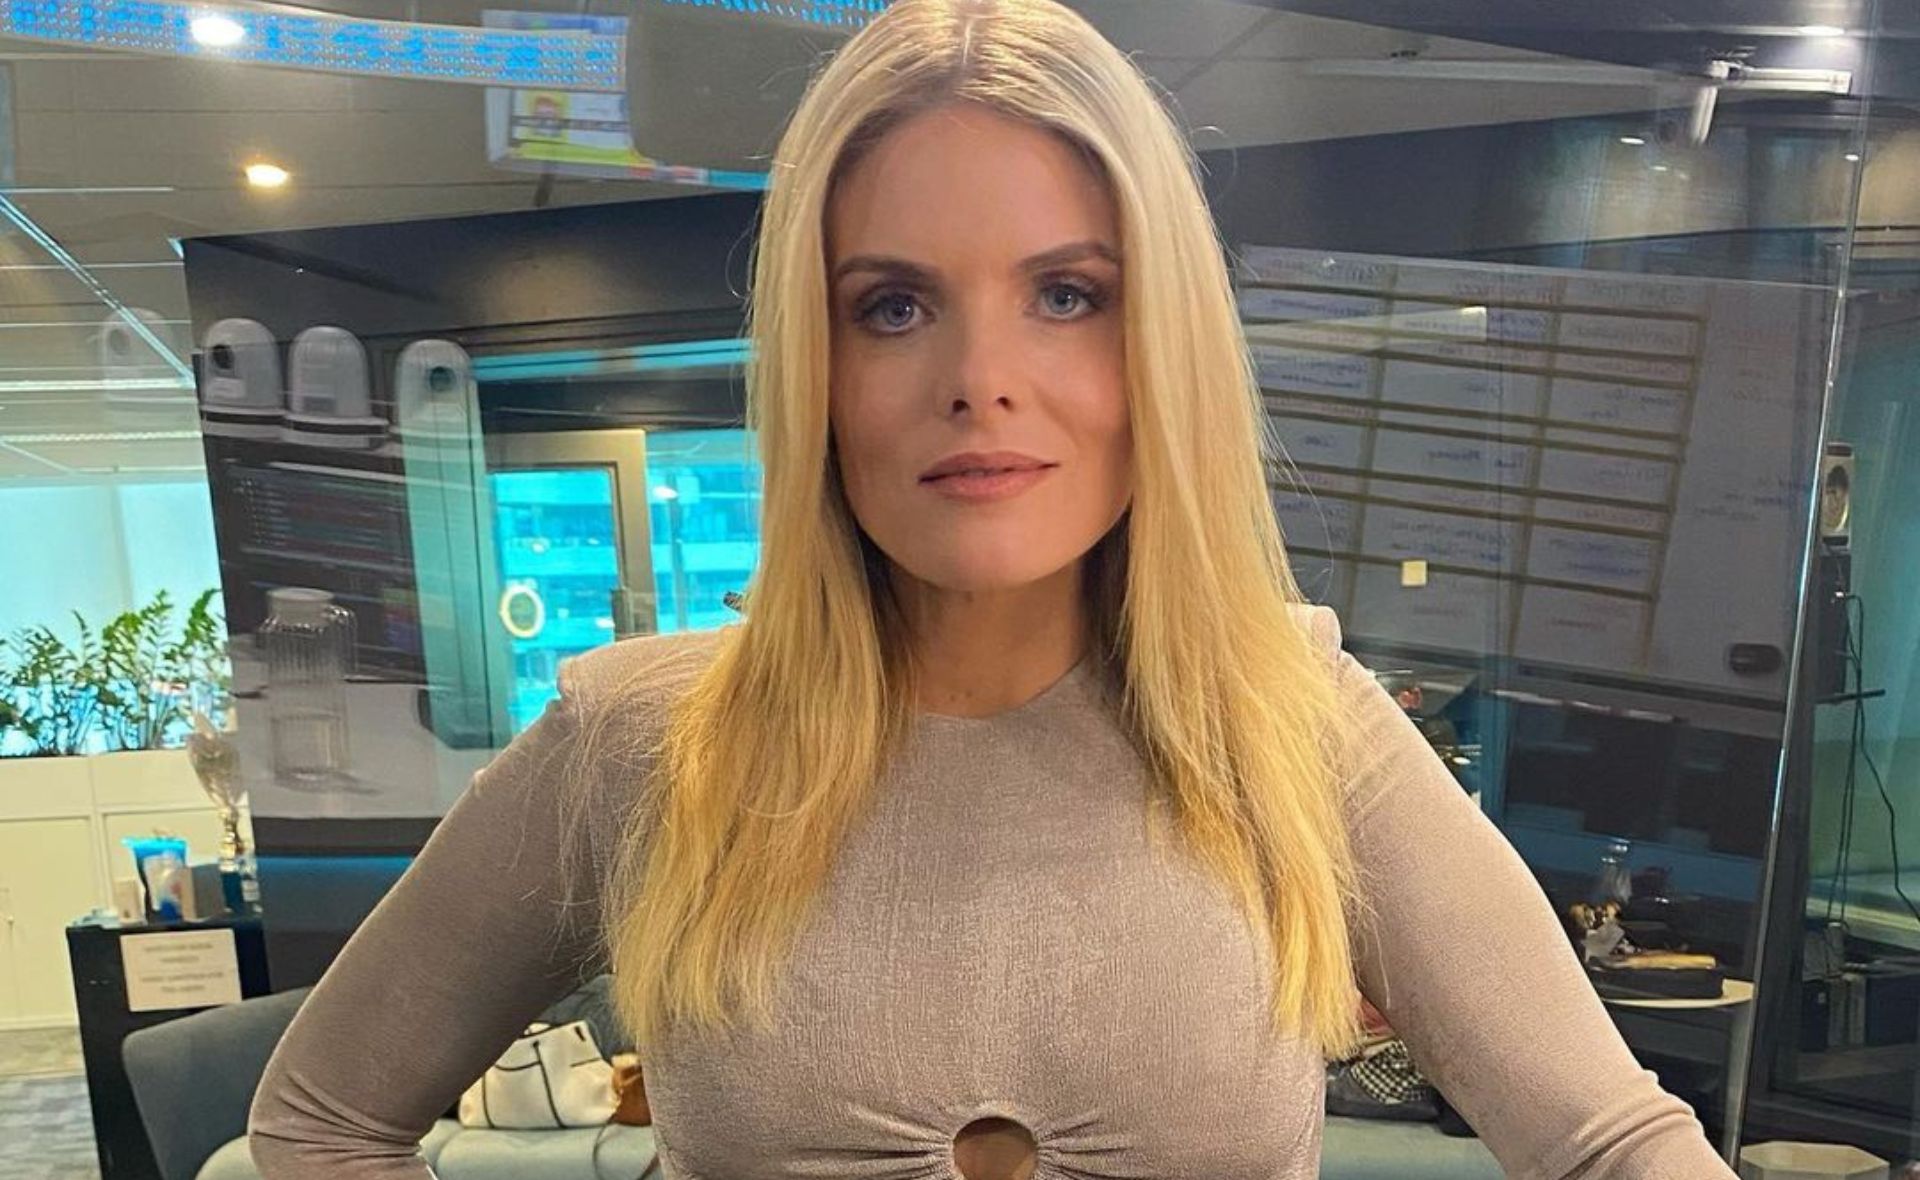 Erin Molan’s on-air outfits have been labelled too revealing and she is ‘triggered’ by the comments